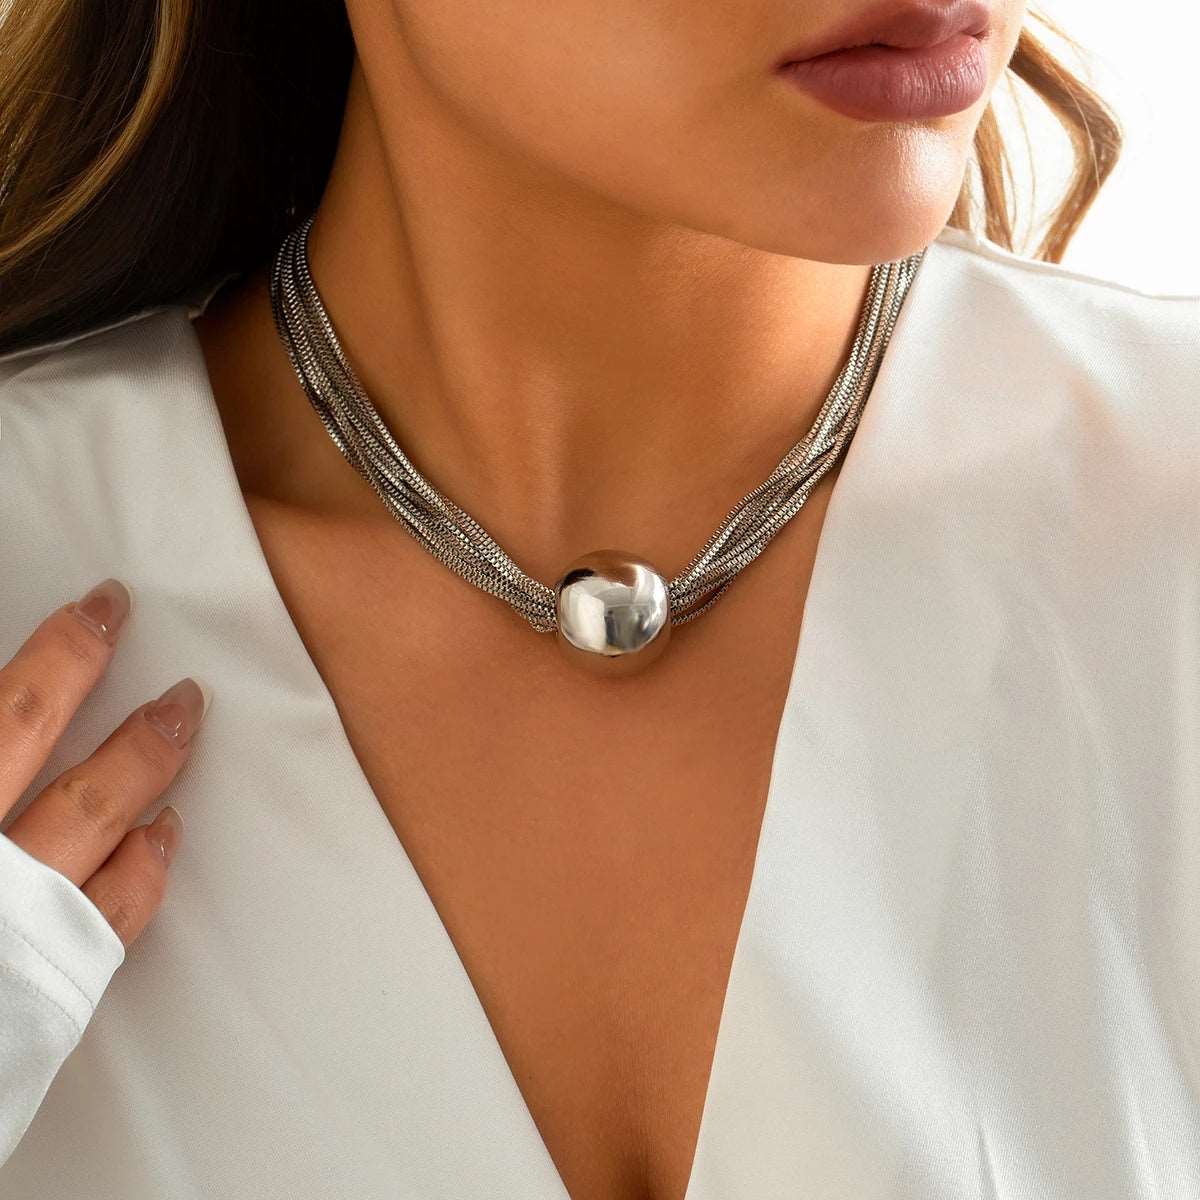 Choker Necklaces for Women Multi Layered Thin Link Chain